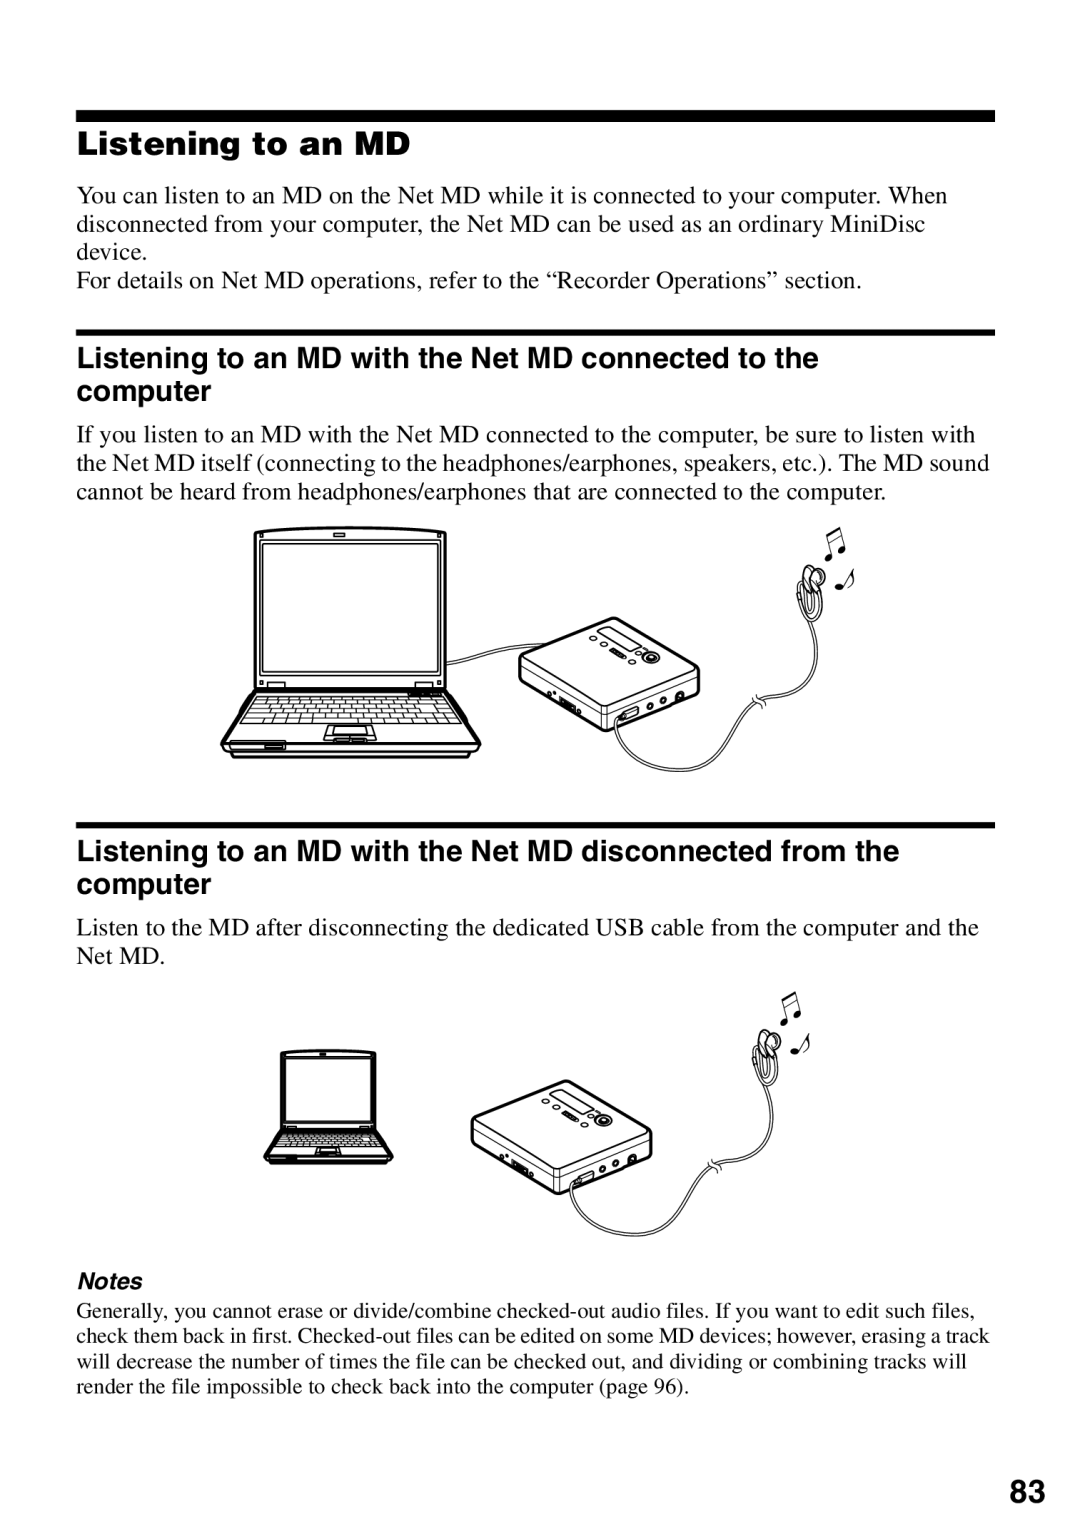 Sony MZ-N510 operating instructions Listening to an MD 